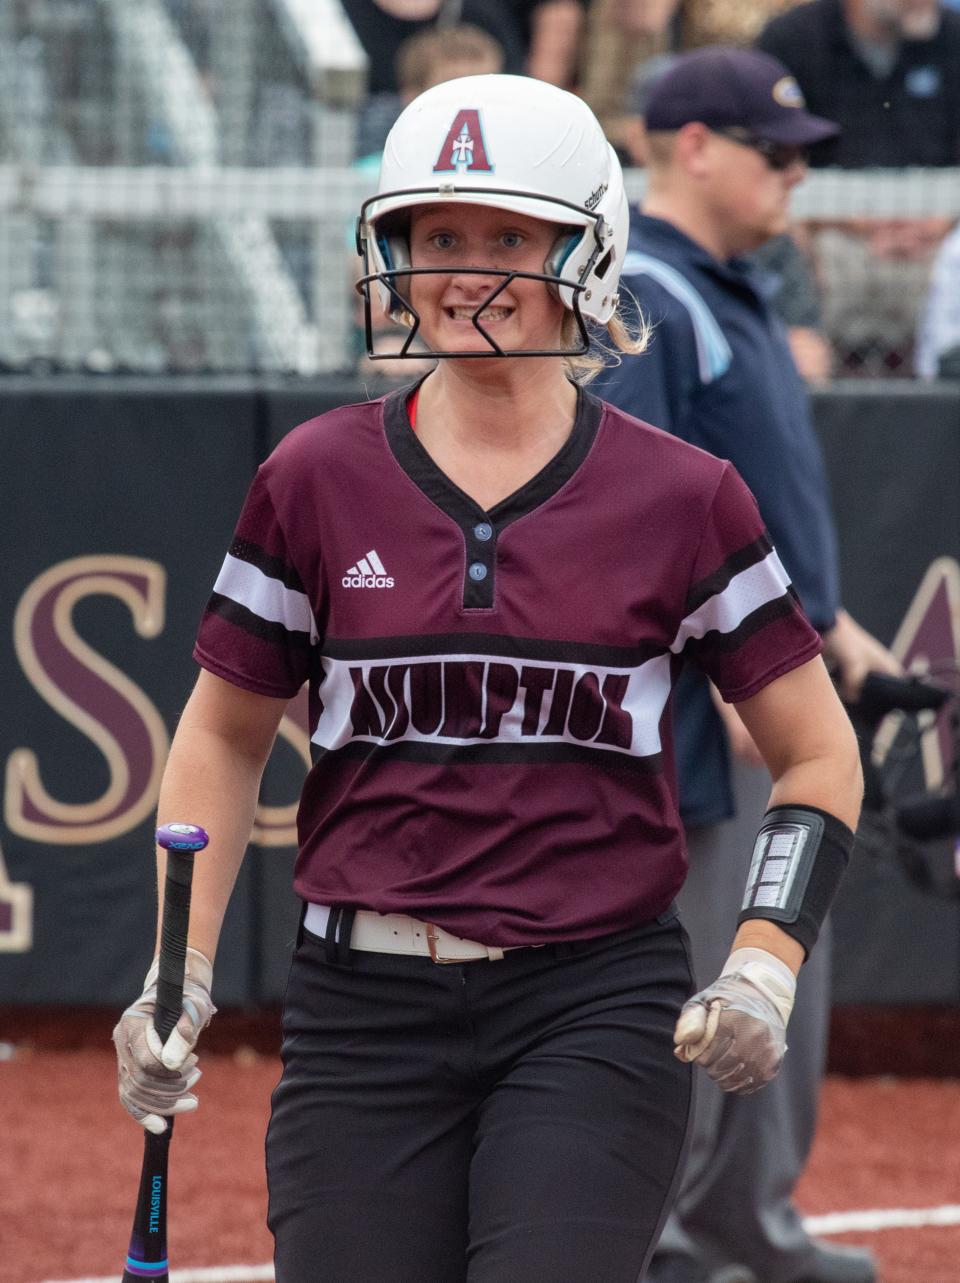 Assumption's Izzy Rushing reacts after scoring a run Tuesday night against Mercy Academy. Assumption won the game 10-0 after an early offensive explosion. April 12, 2022